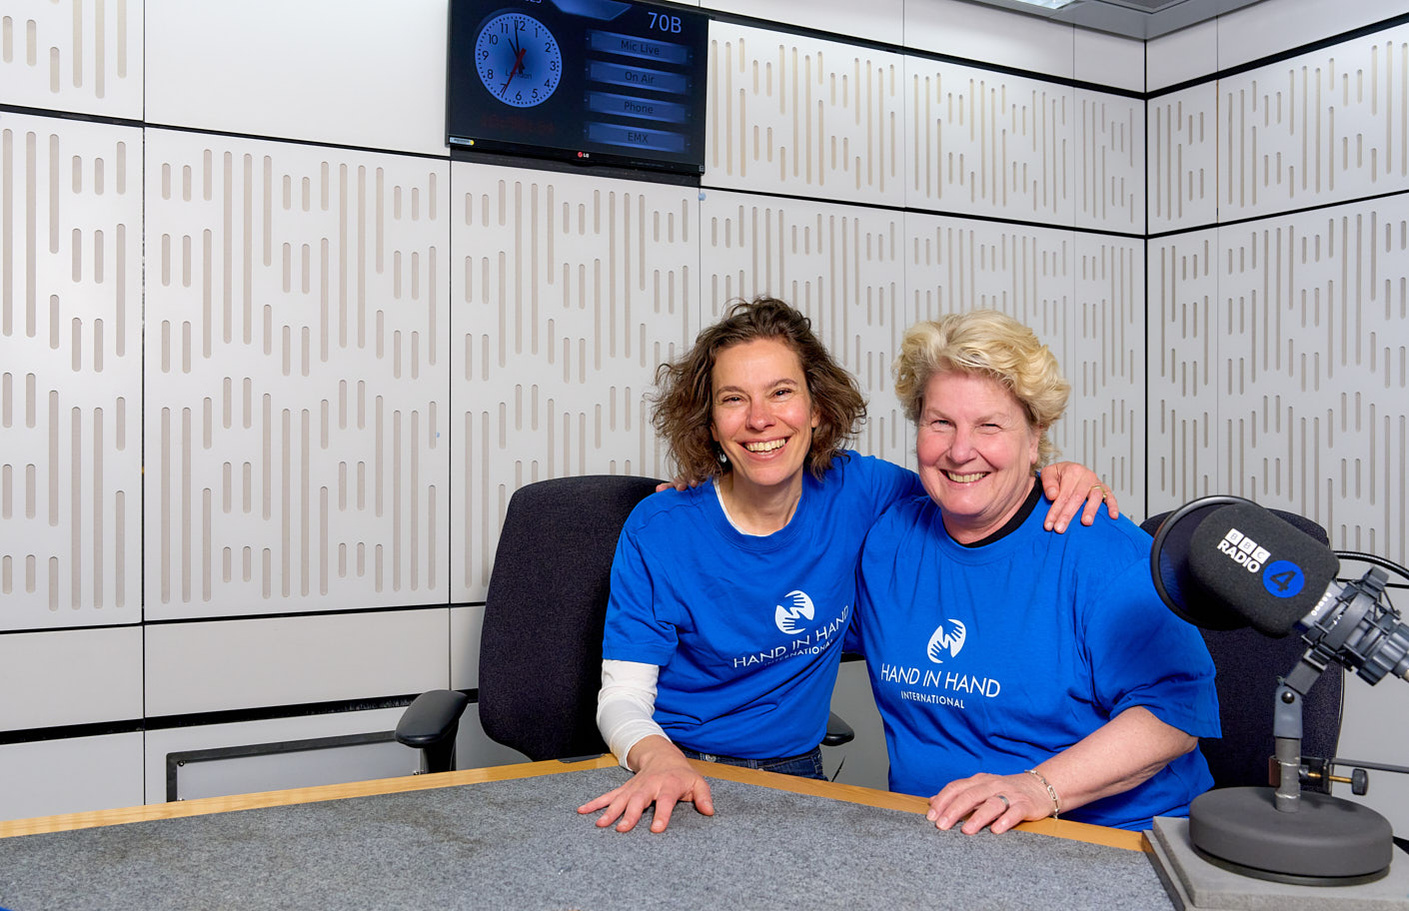 Sandi Toksvig and Dorothea Arndt photographed by Josh Caius at the BBC Broadcasting House, for Hand in Hand International radio appeal.